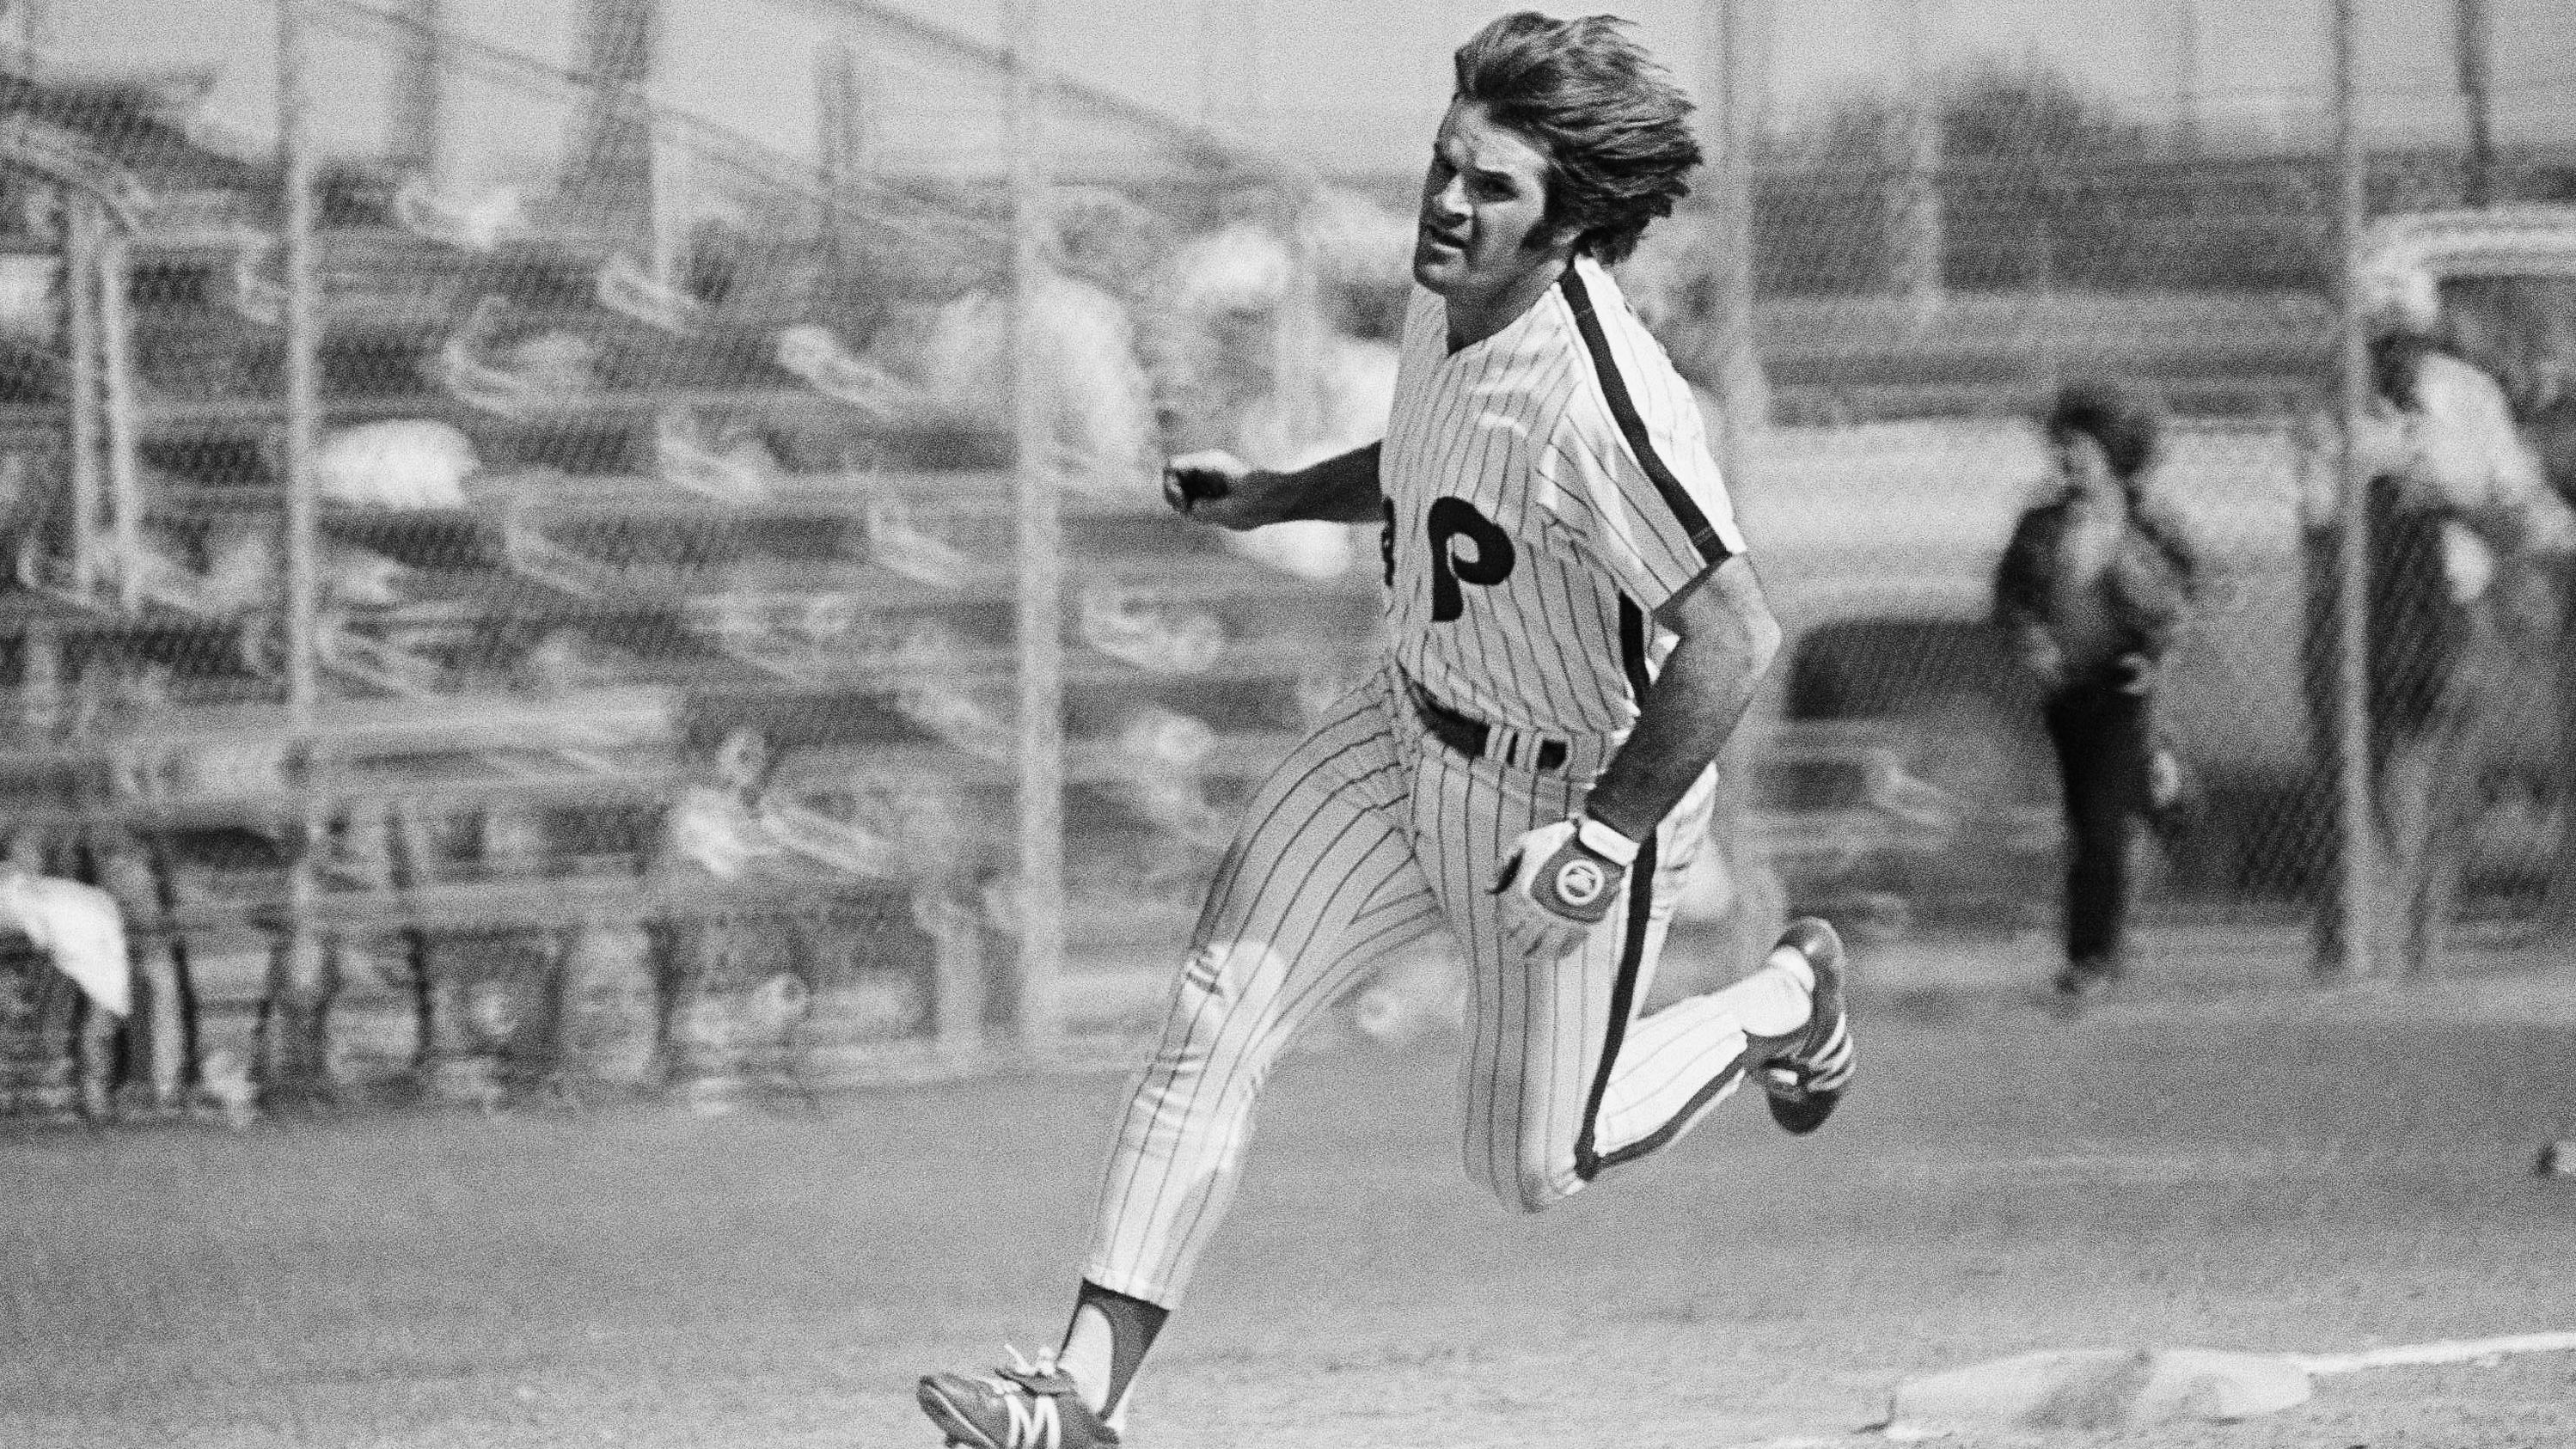 Pete Rose, Tim McCarver, others to discuss Phillies' 1980 title